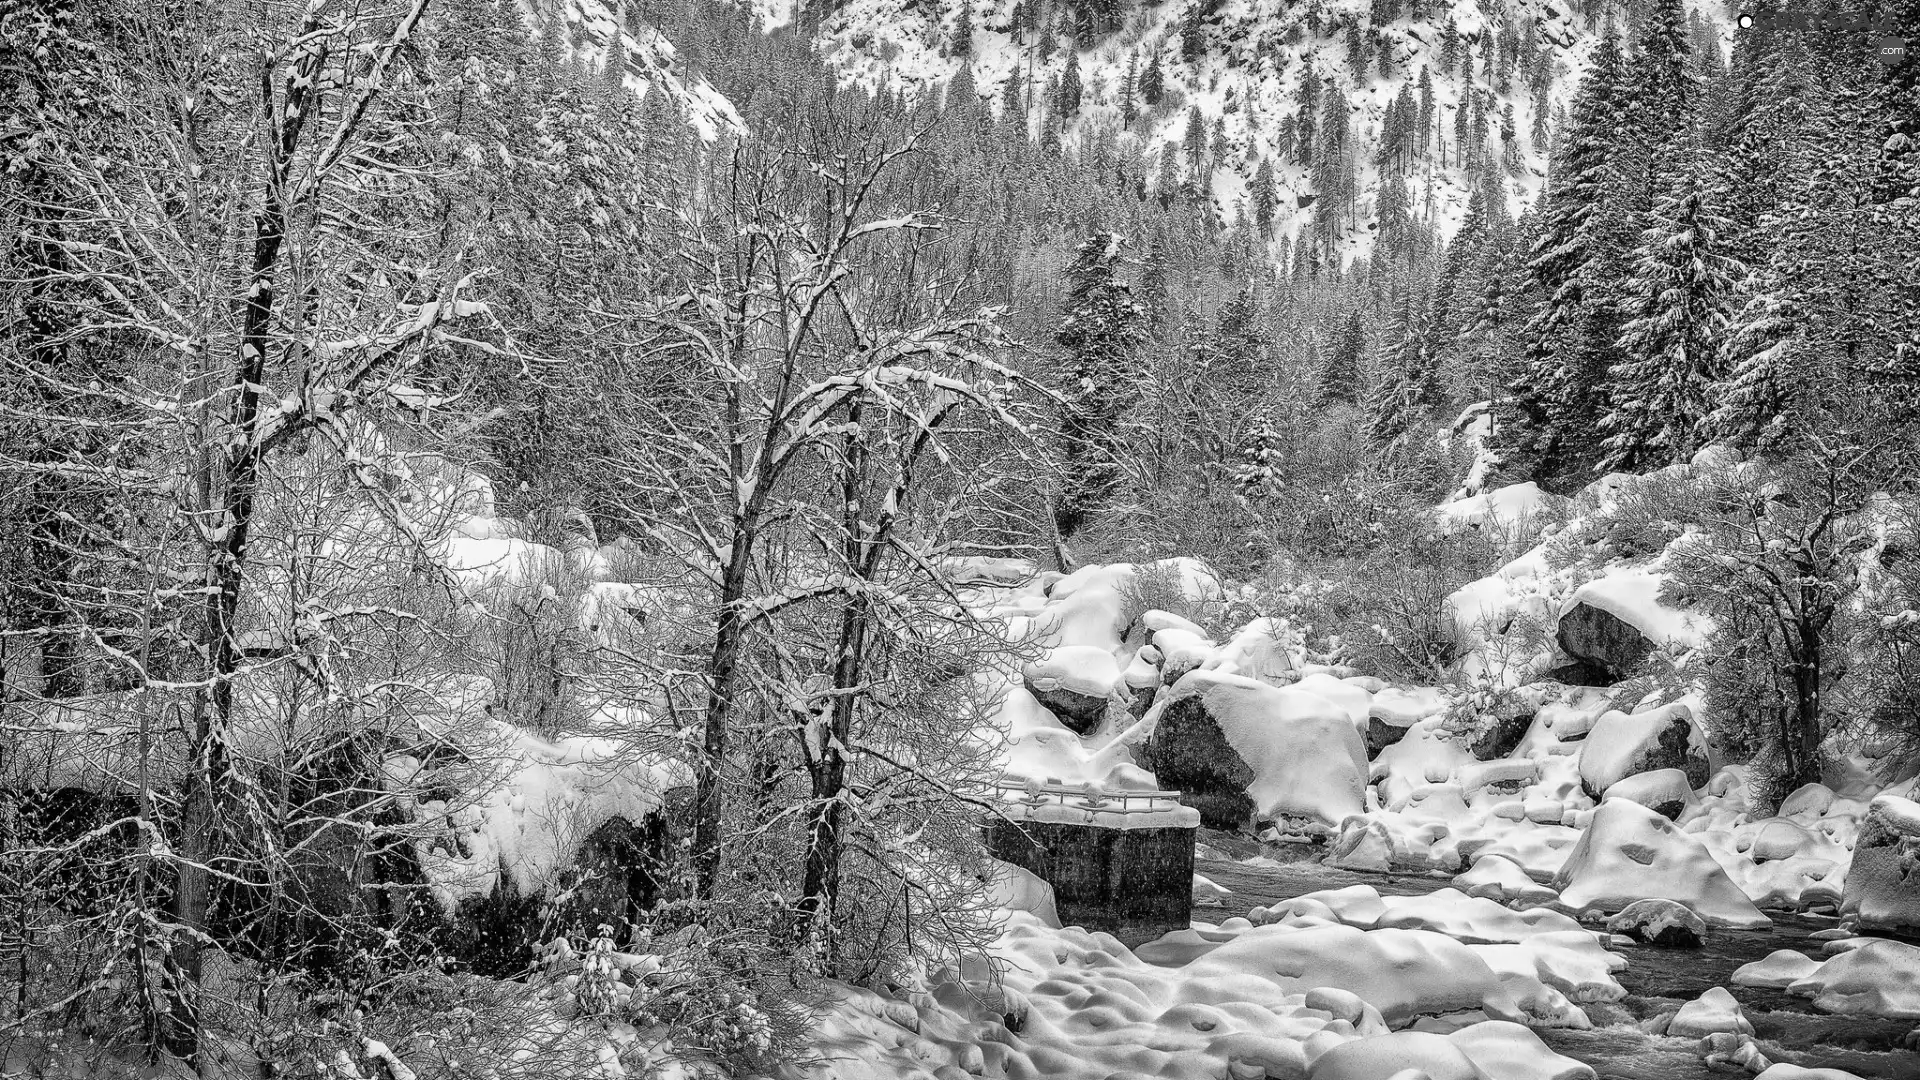 viewes, snow, Snowy, trees, winter, River, Stones